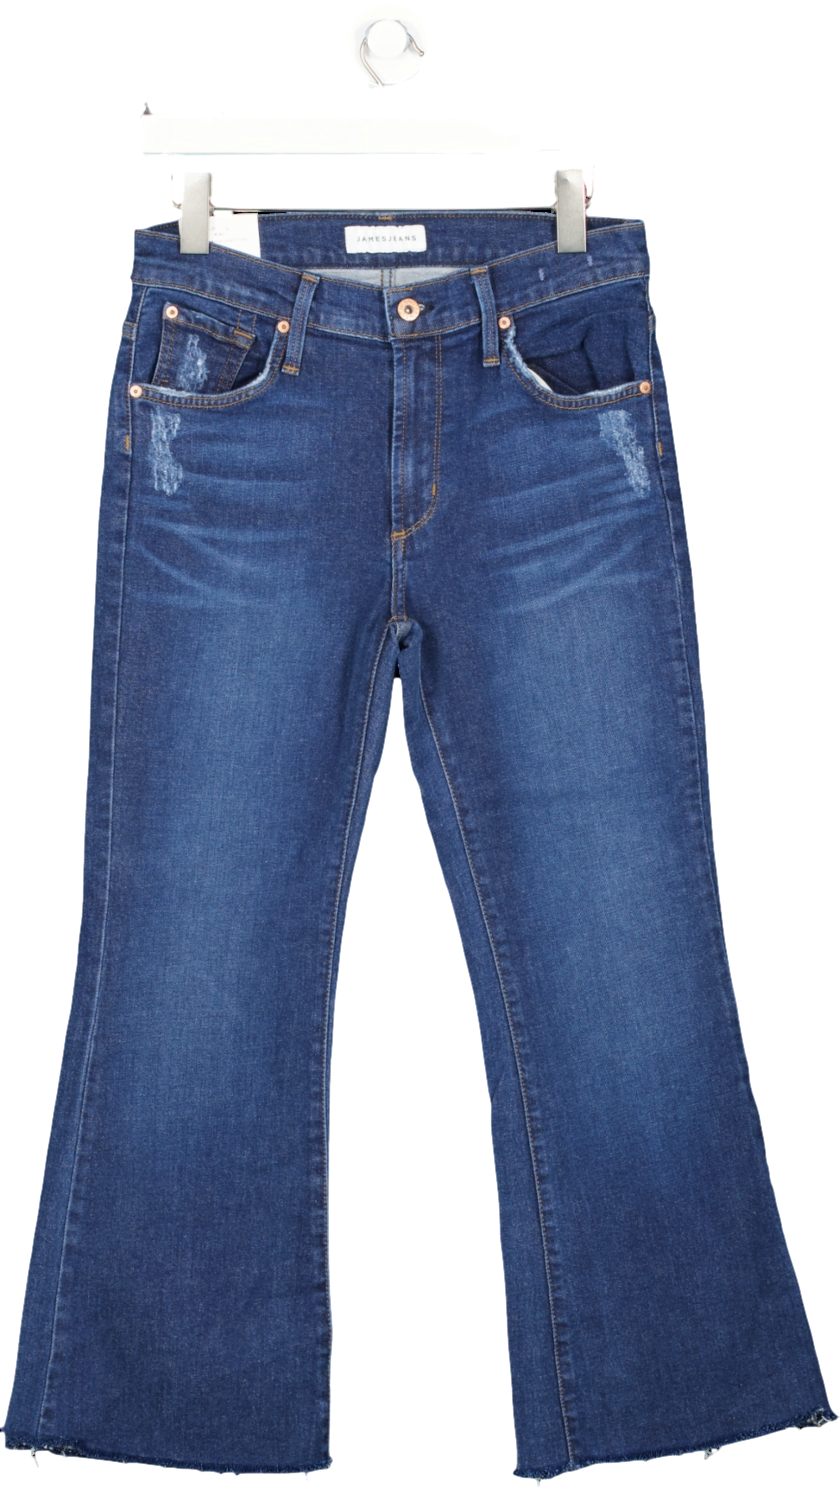 James Jeans Blue Ankle Length Flare Jeans BNWT W27